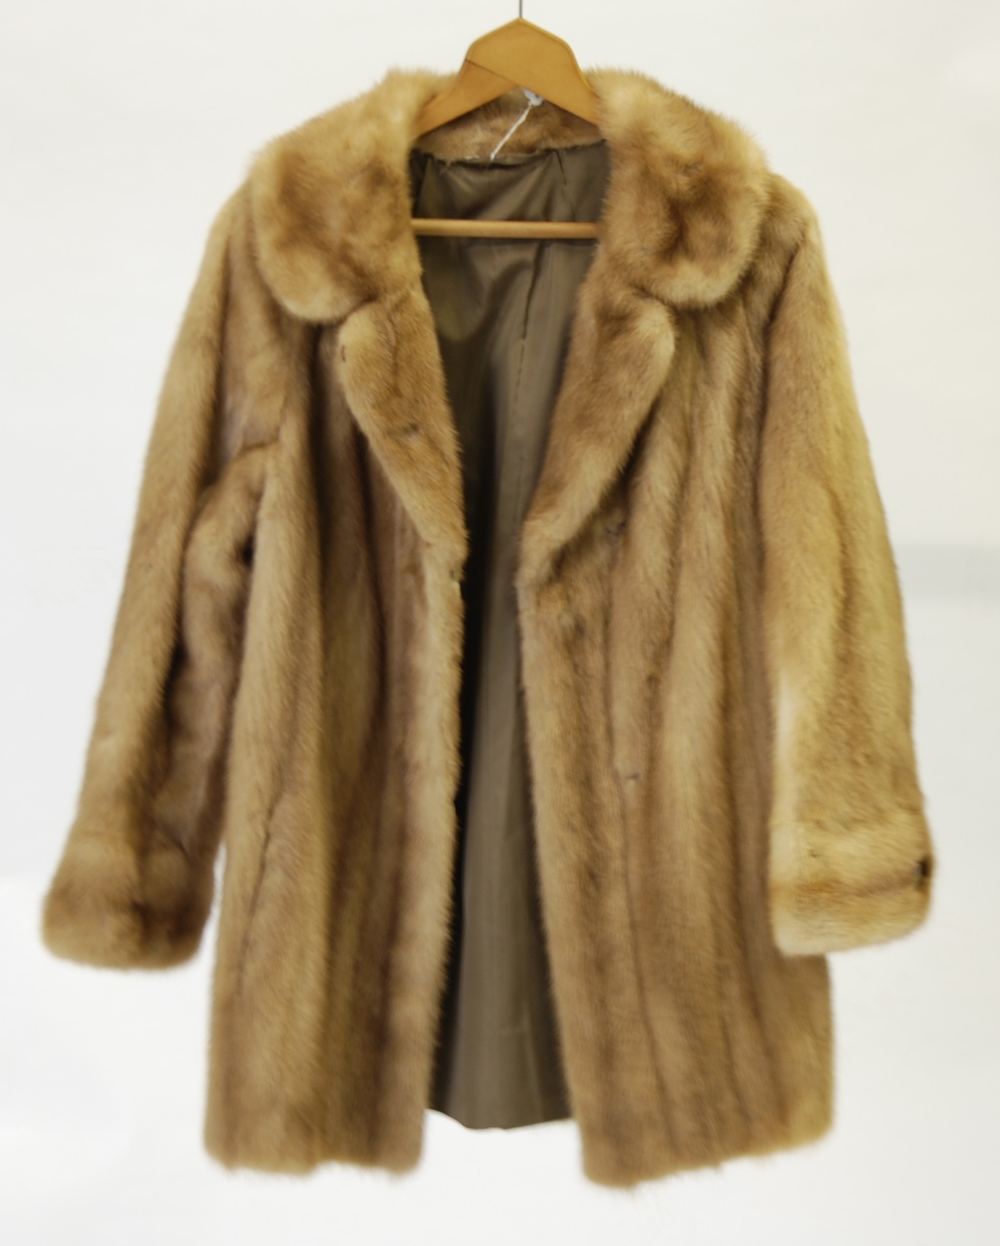 A LADY'S  LIGHT BROWN PASTEL MINK THREE QUARTER LENGTH FUR COAT, revered collar, double breasted